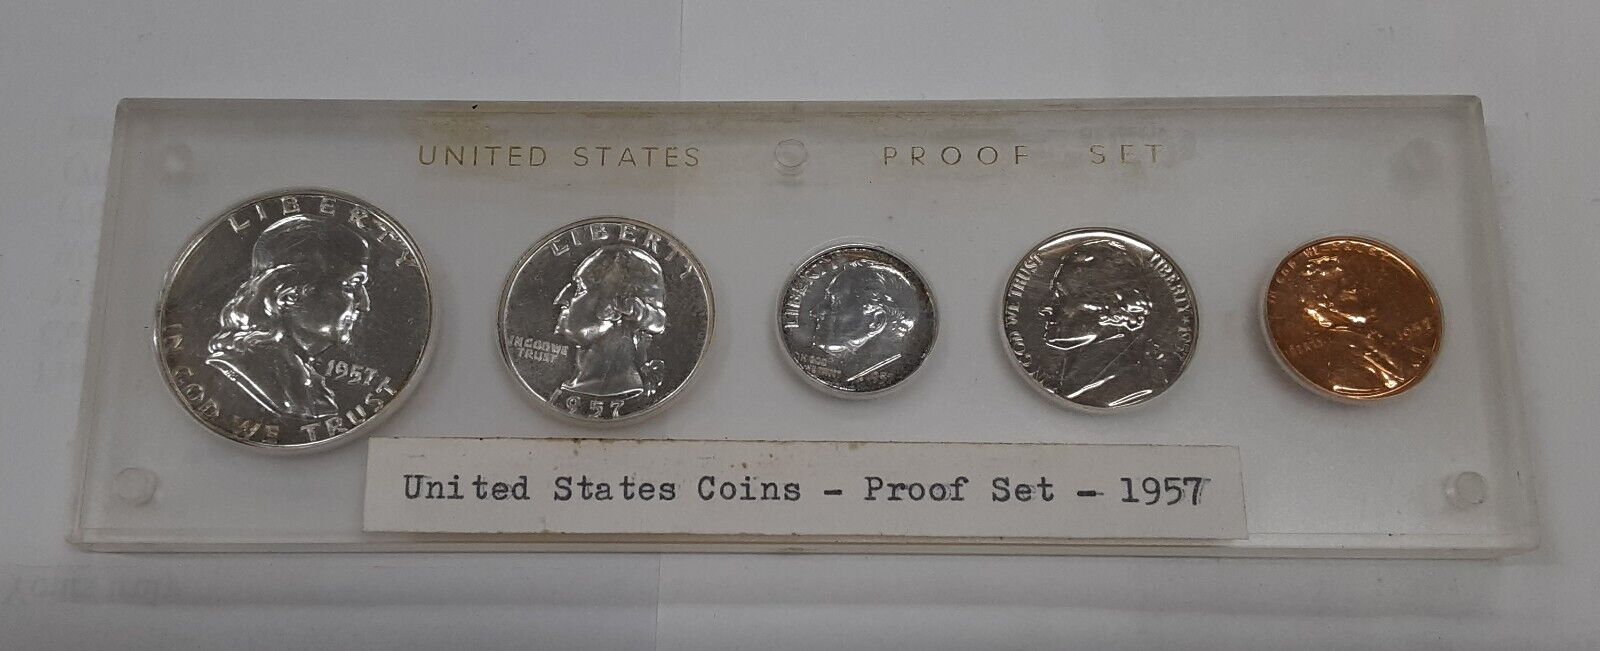 1957 US Silver Proof Set - 5 Proof Coins in Clear Plastic Holder  (A)